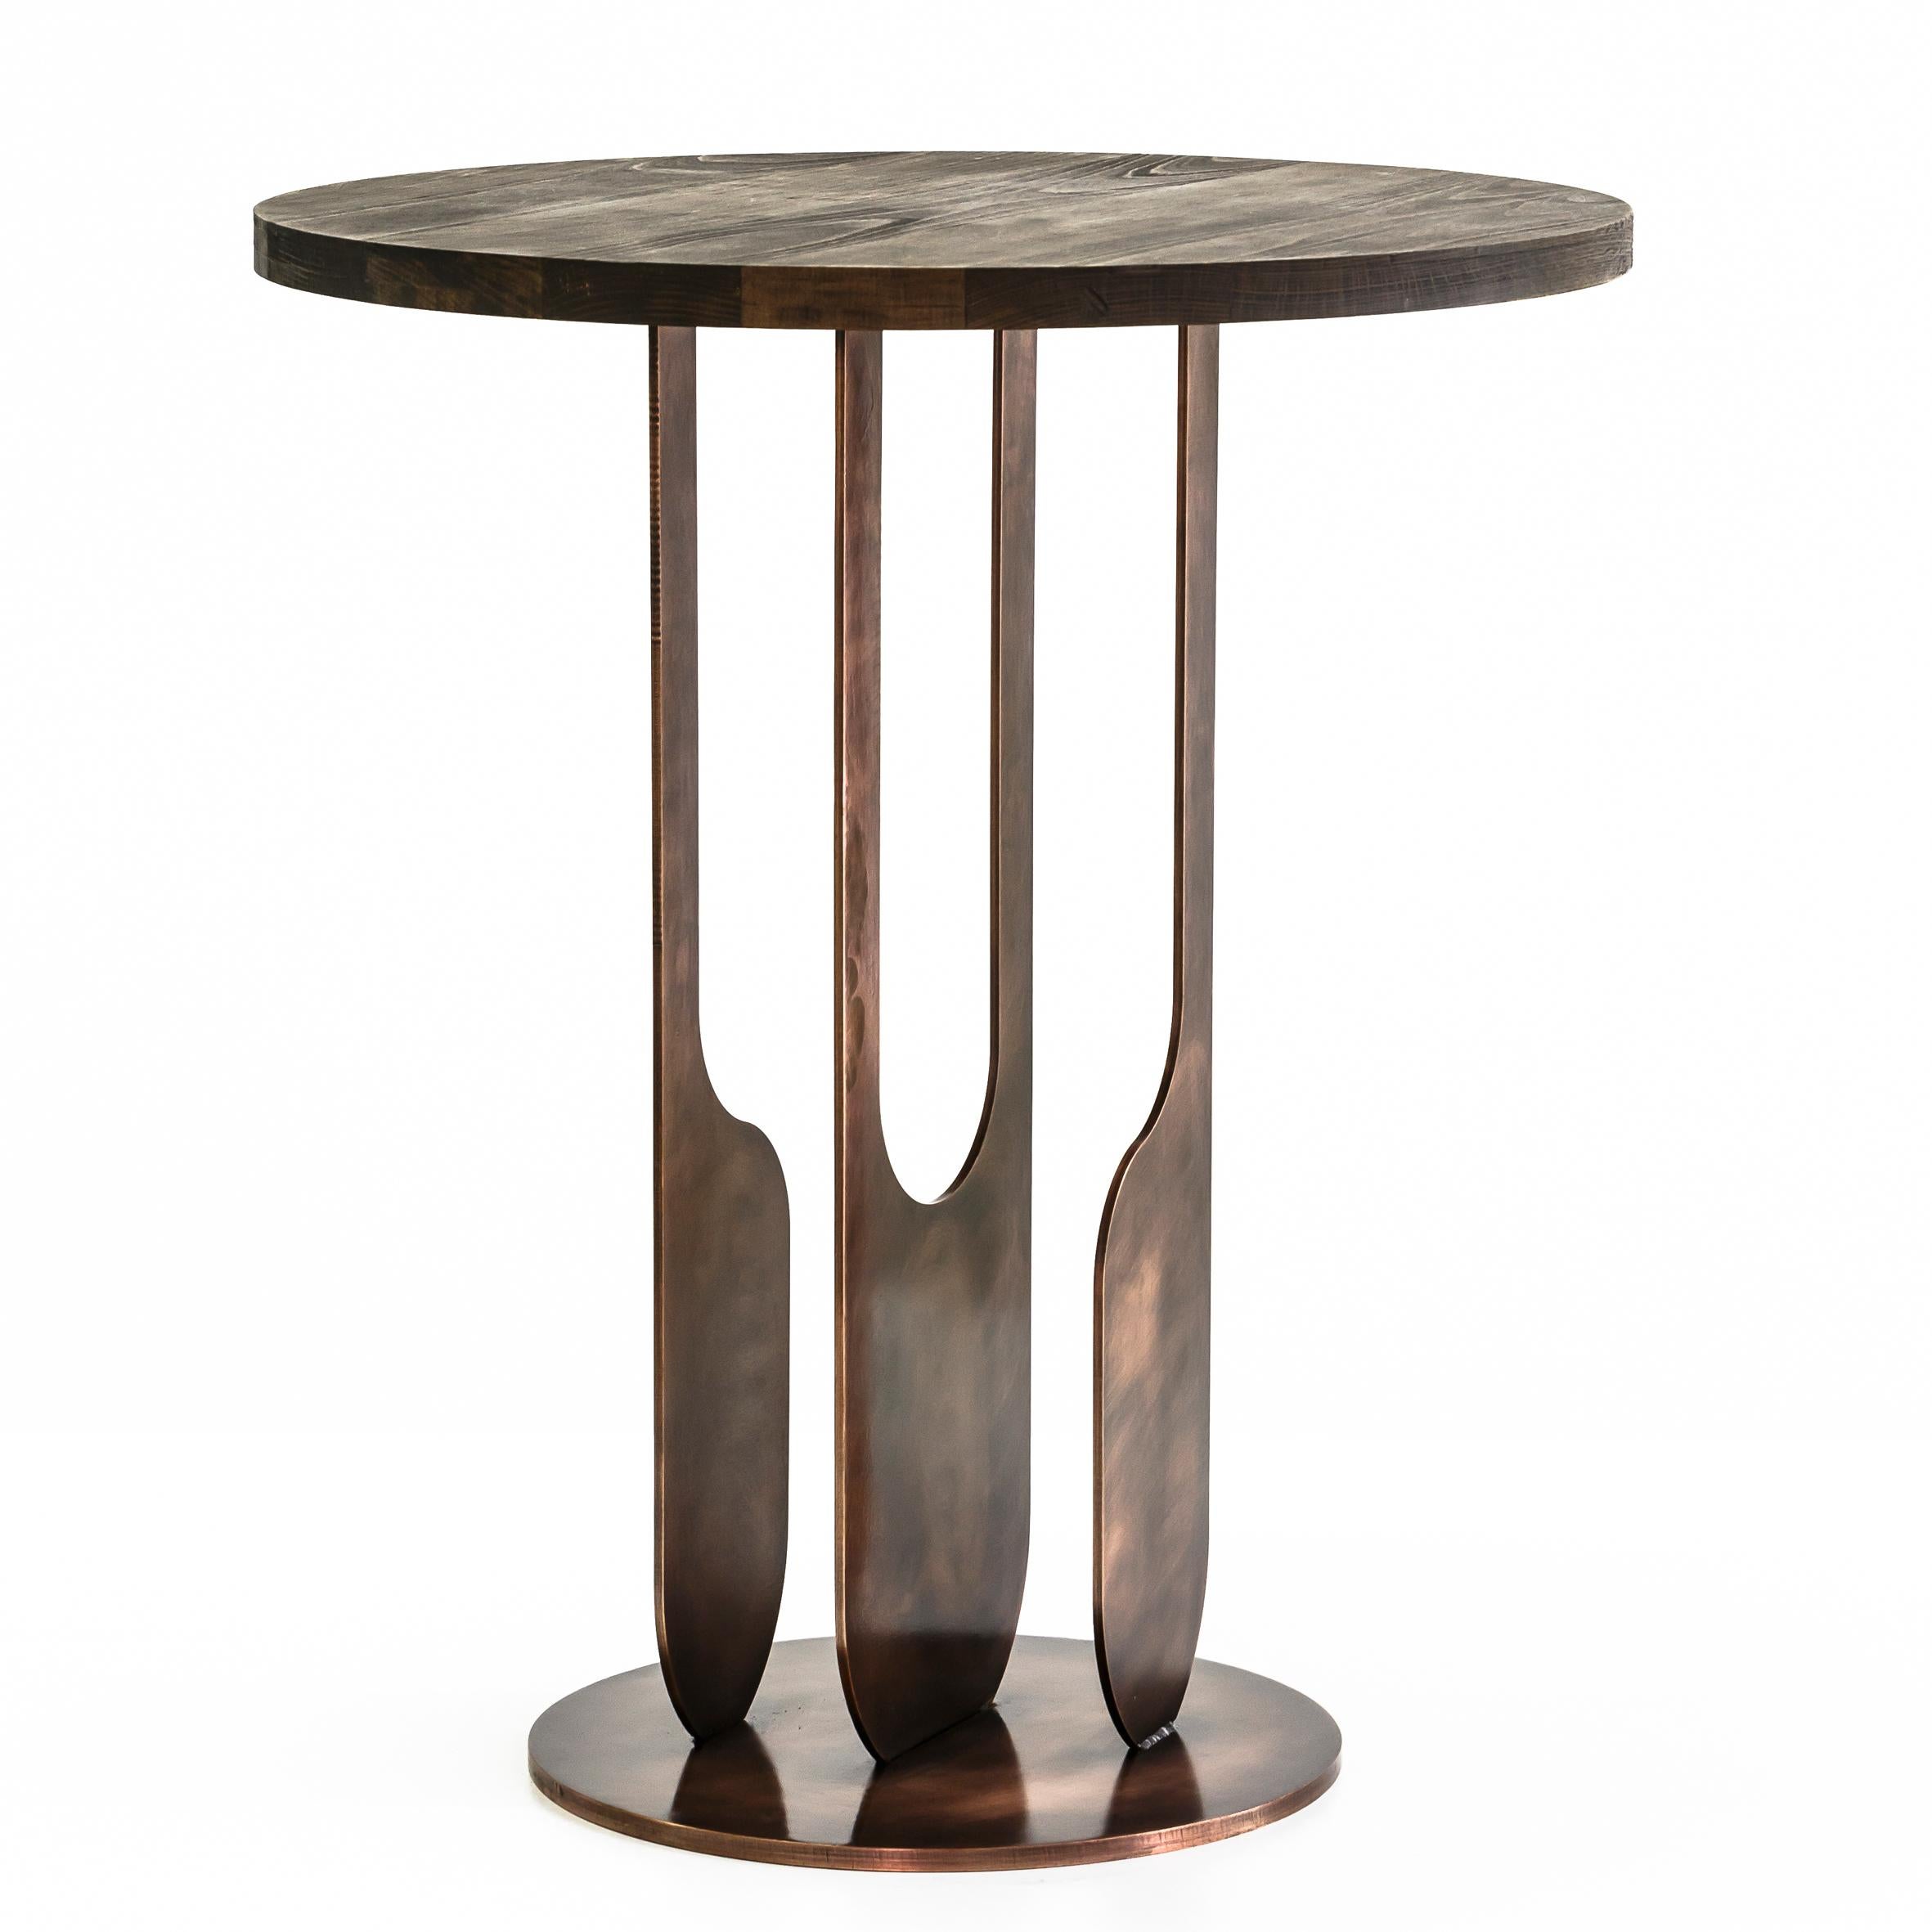 Drop side table by Egg Designs
Dimensions: 60 L X 60 D X 58 H cm 
Materials: Antique copper plated steel, stained oak top

Founded by South Africans and life partners, Greg and Roche Dry - Egg is a unique perspective in contemporary furniture